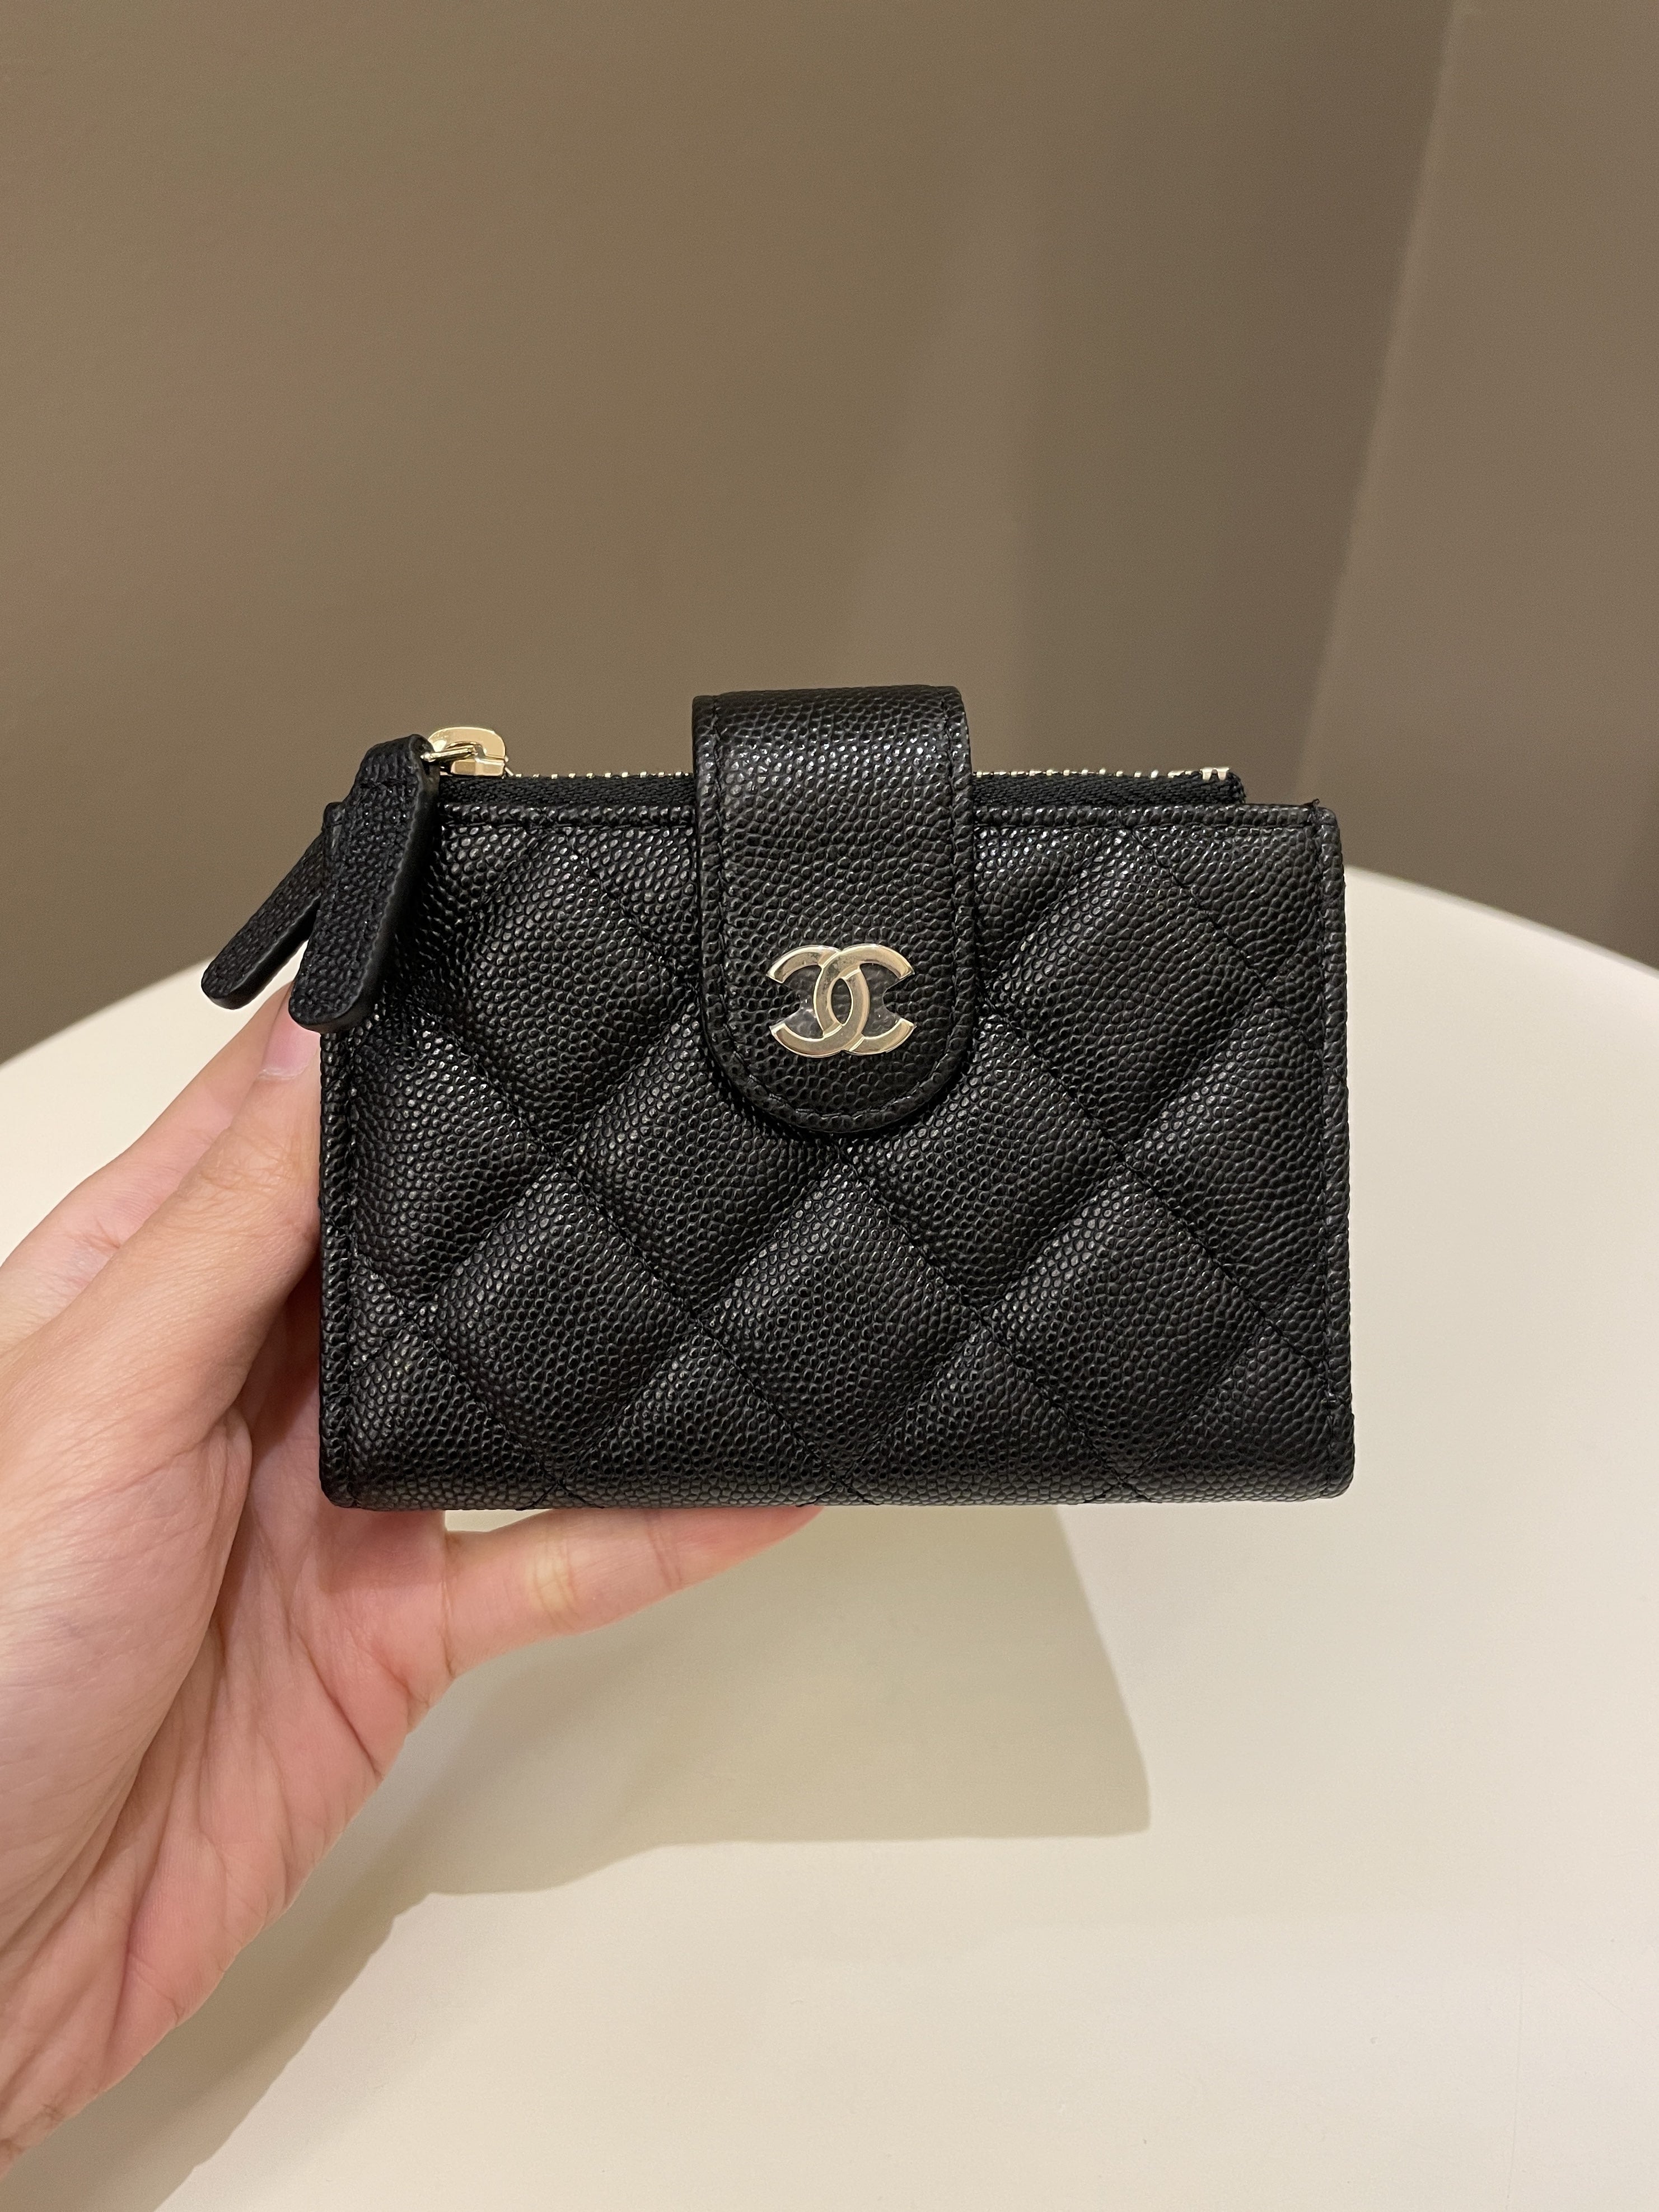 how much is a chanel card holder